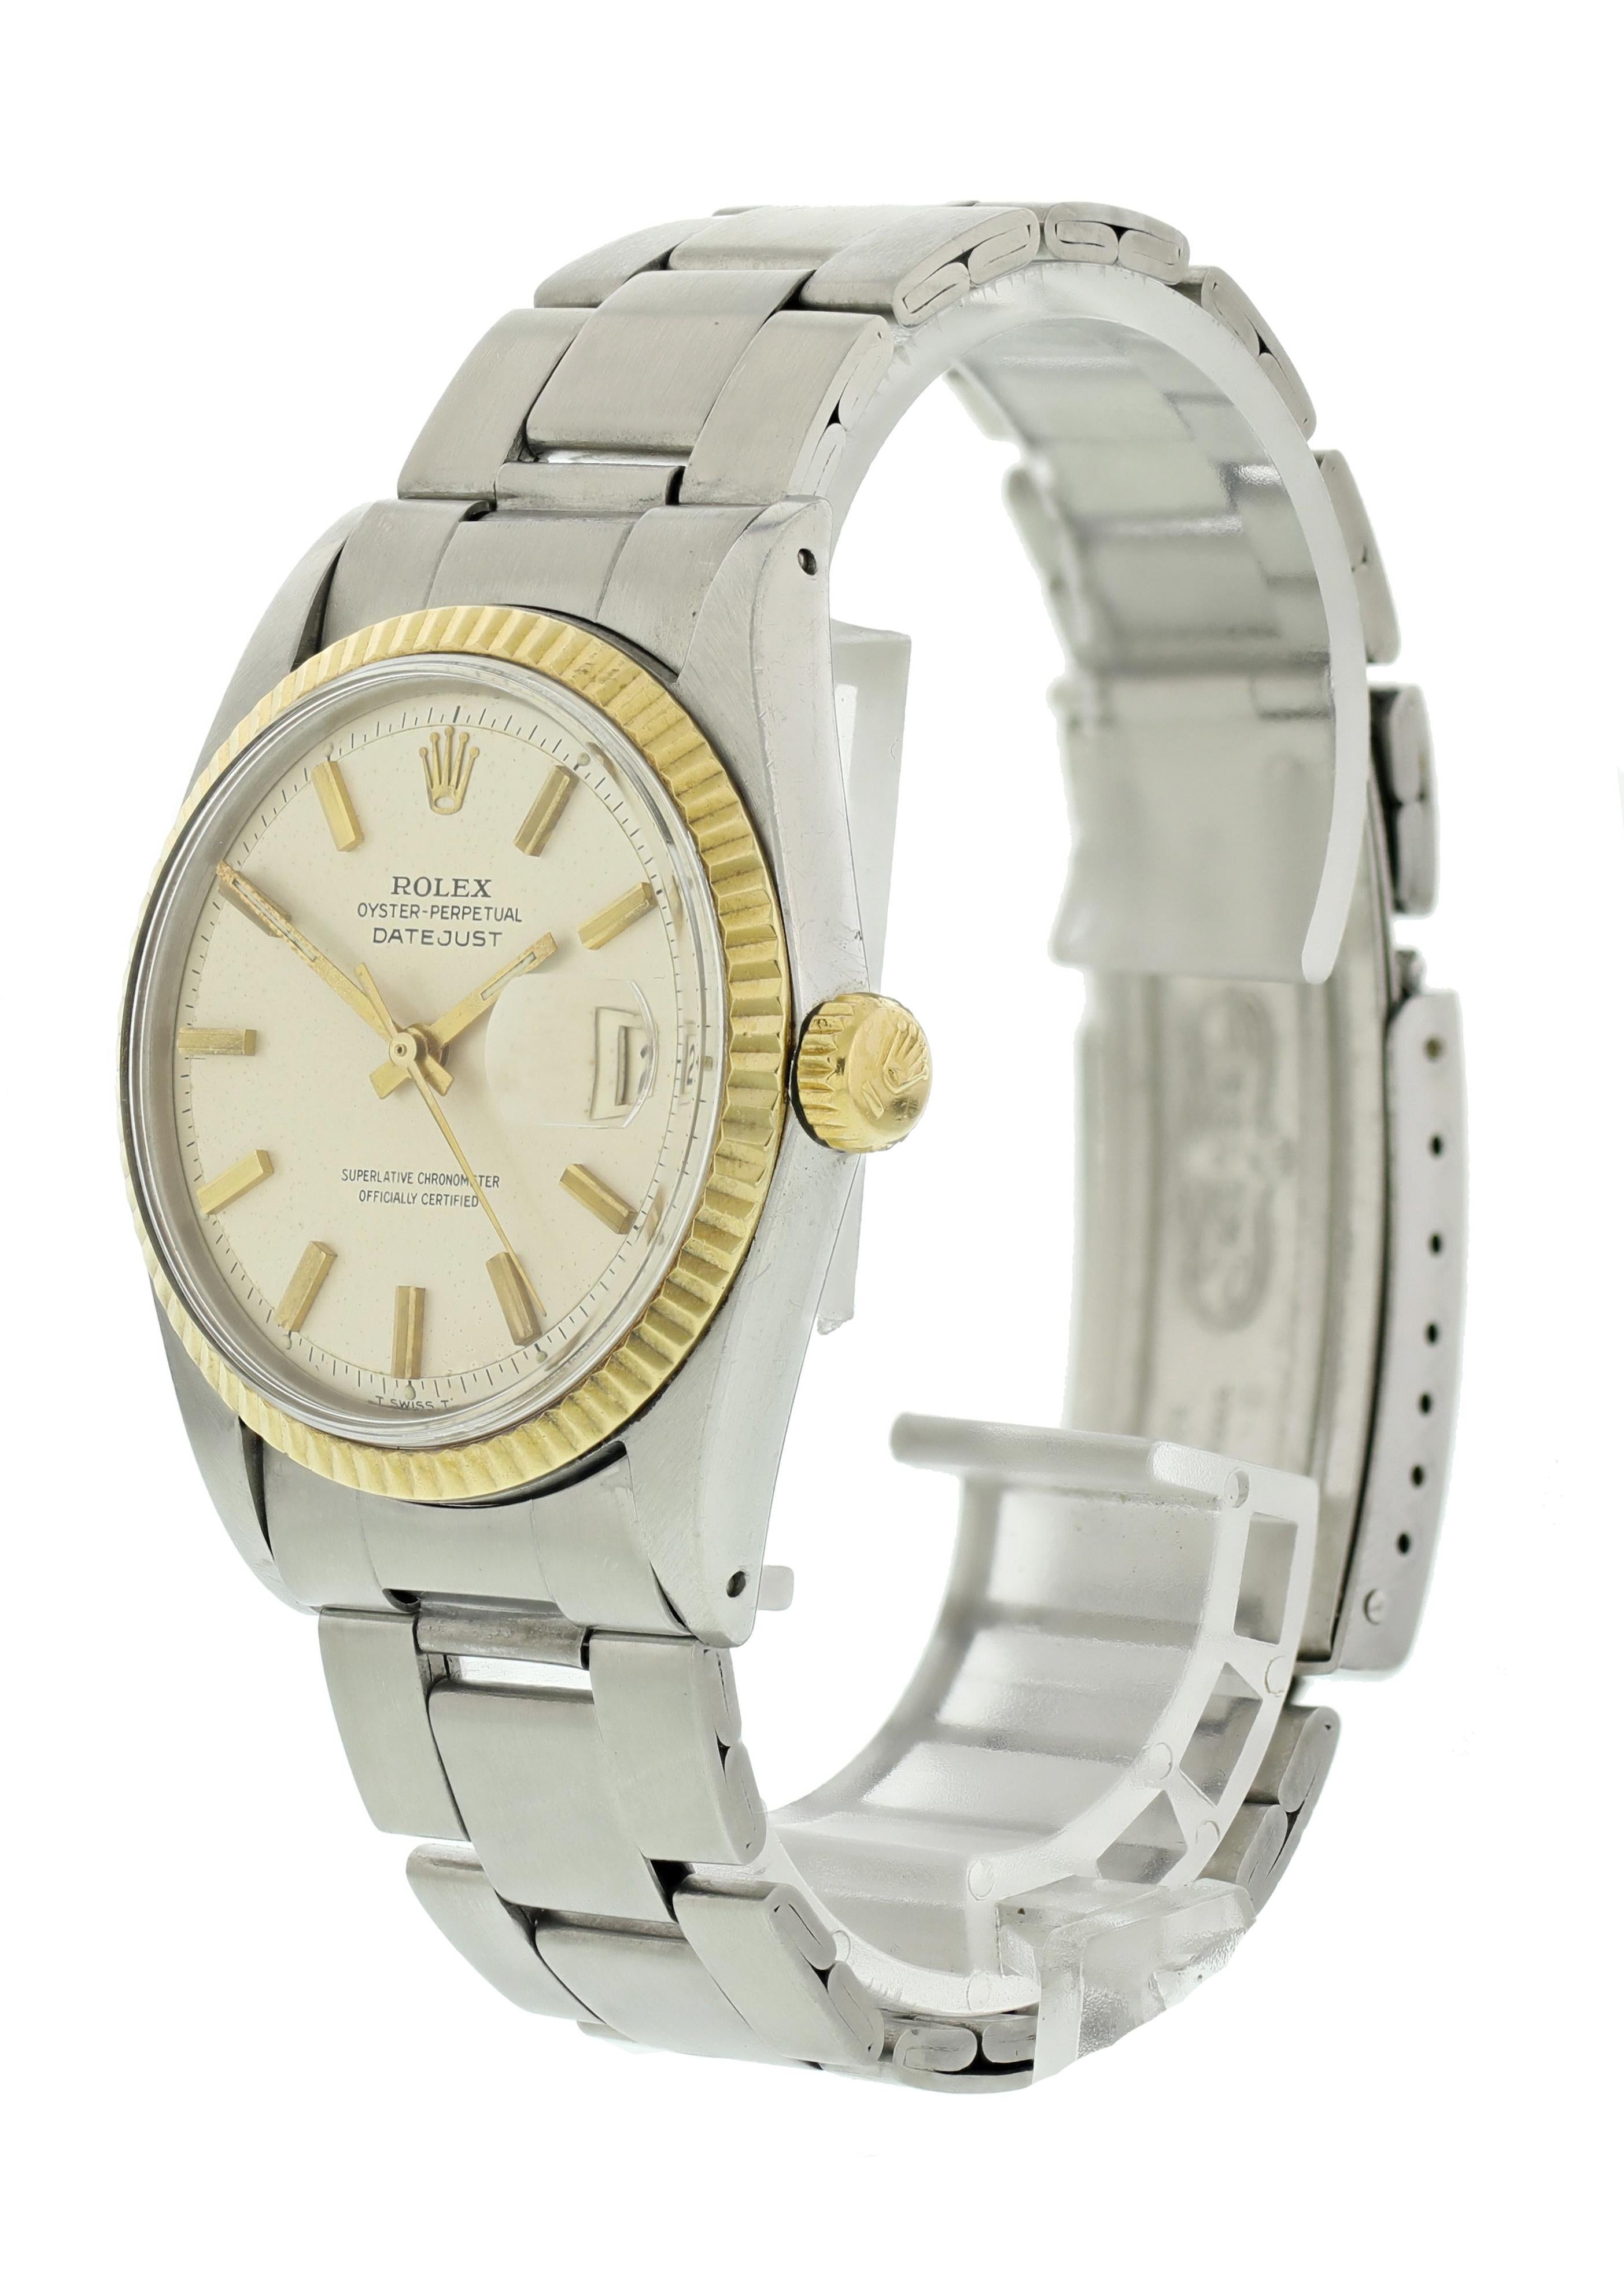 Rolex Oyster Perpetual Datejust 1601 Mens Watch. 36mm Stainless steel case. 18K yellow gold fluted bezel. Pie Pan Silver dial with gold tone hands and hour markers. Minute marker around the outer dial. Date display at the 3 o'clock position.